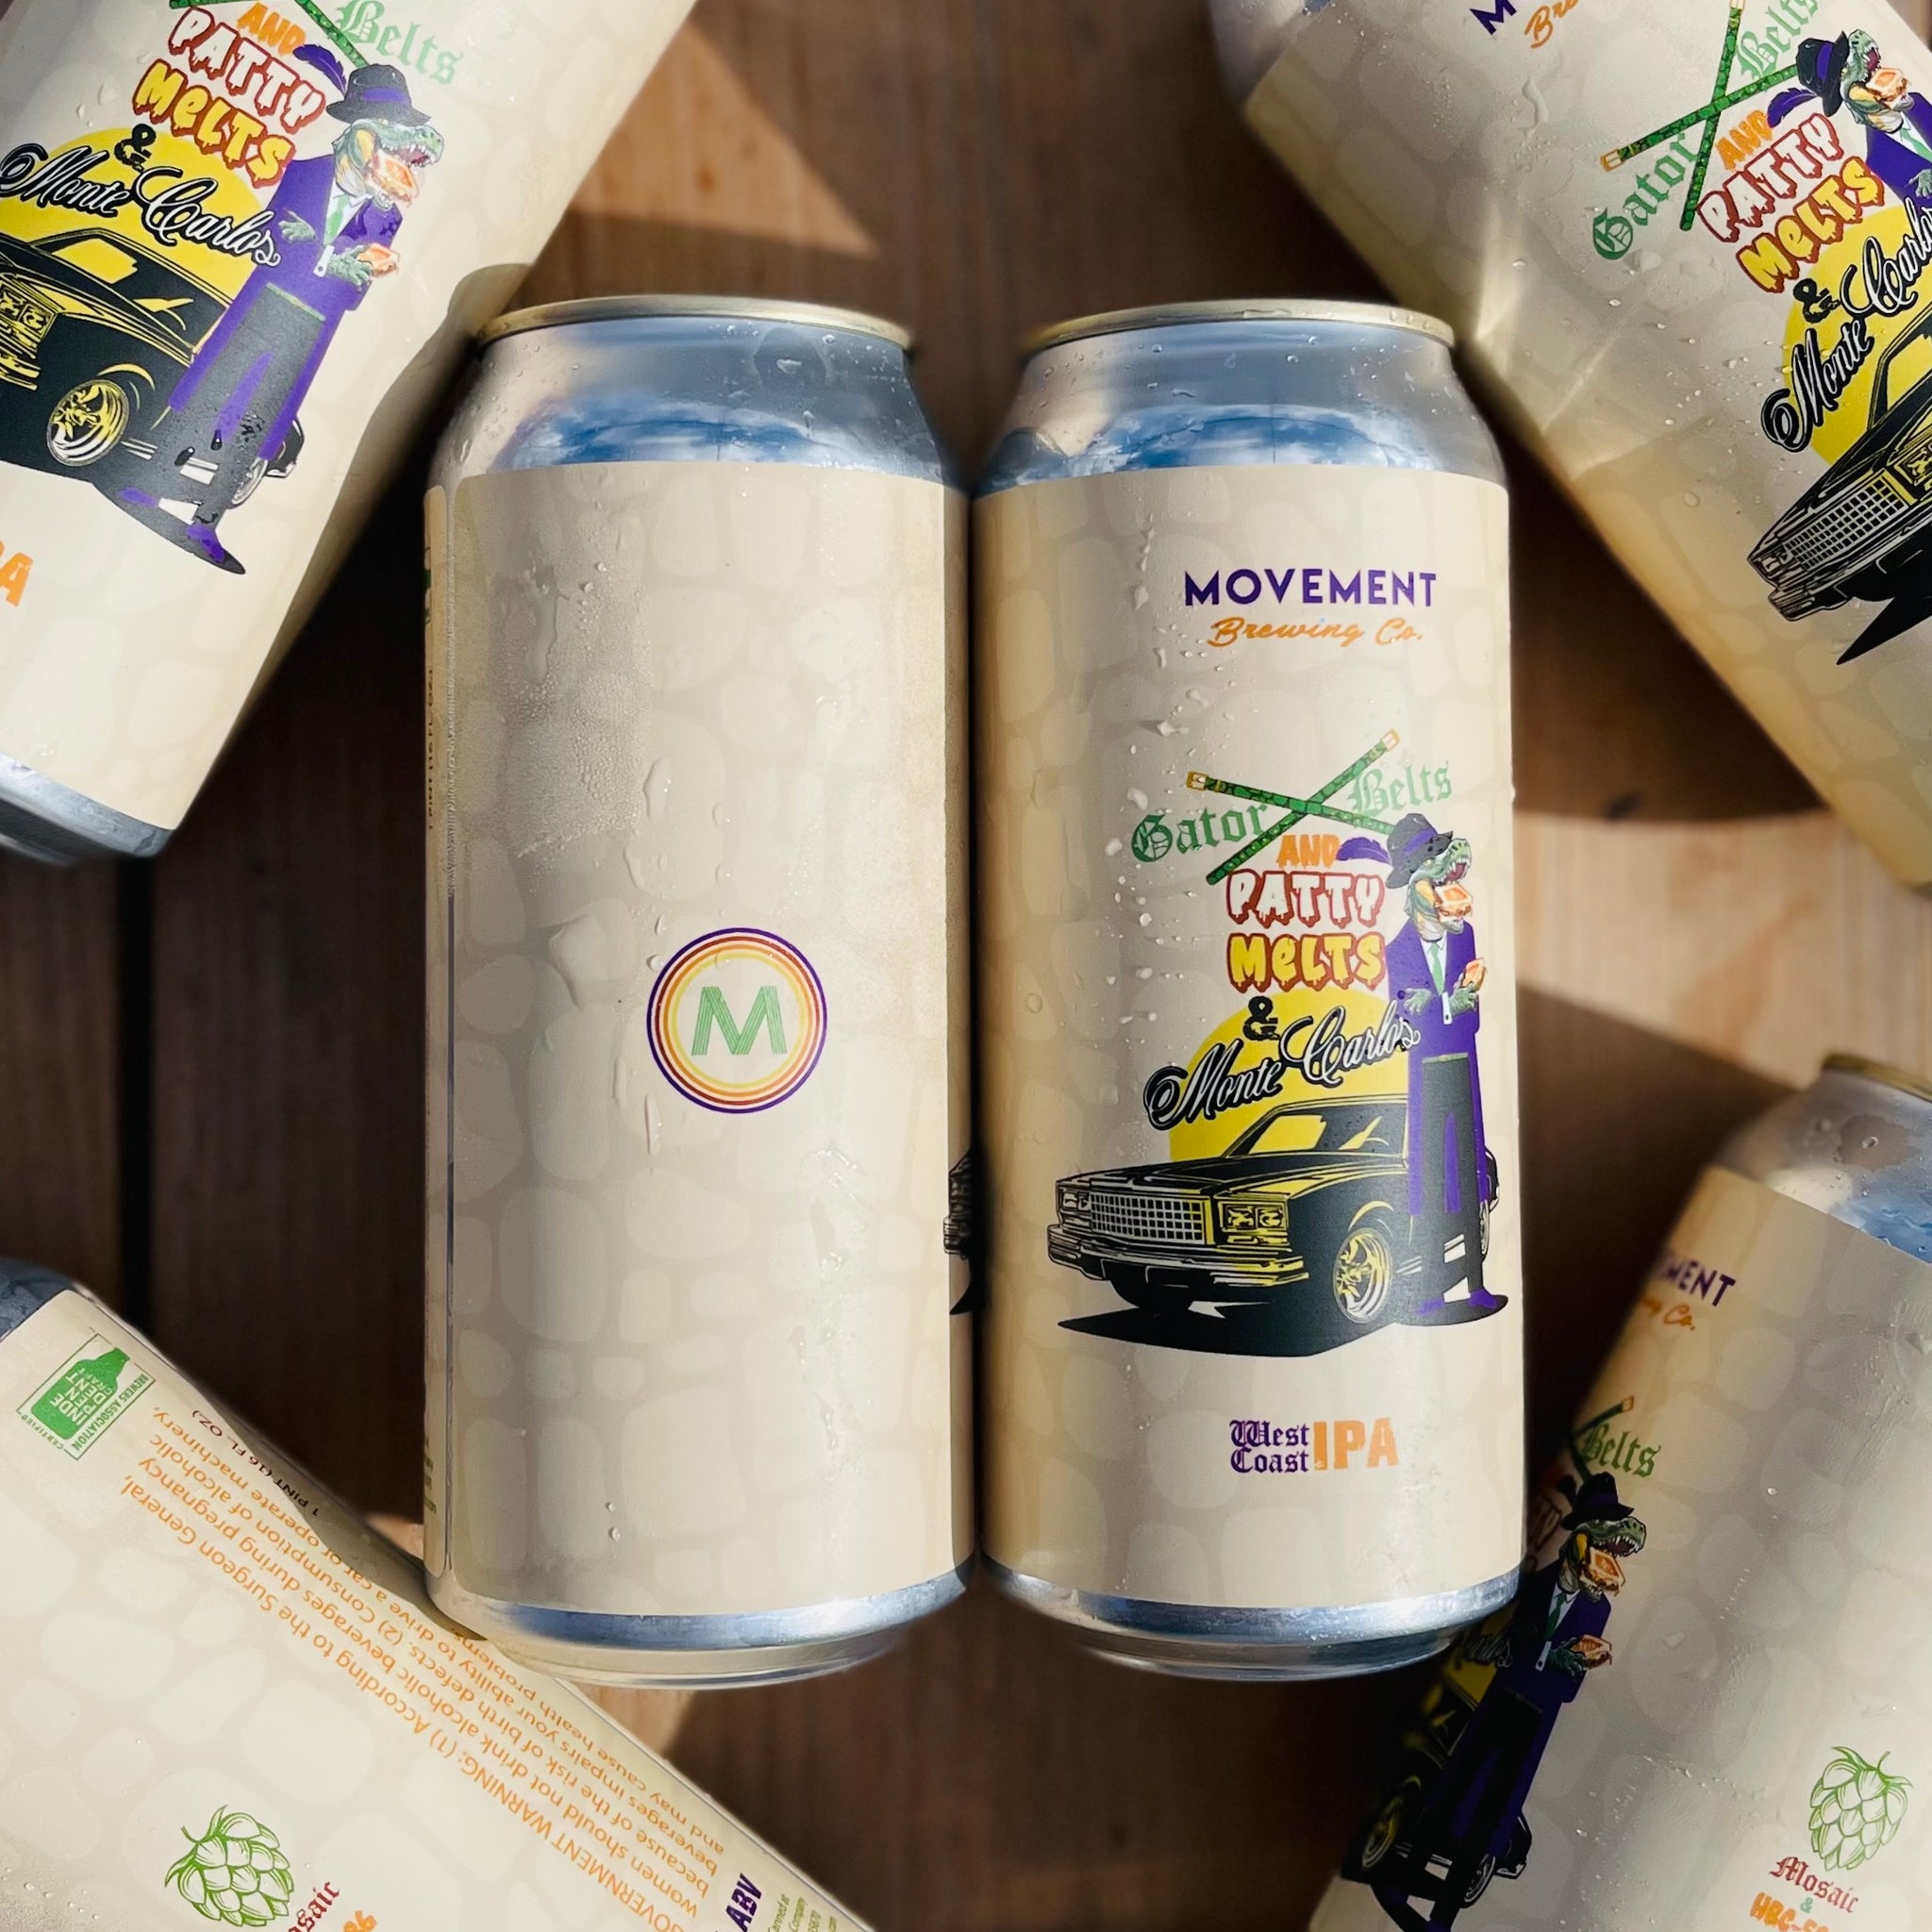 Gator Belts & Patty Melts & Monte Carlo's // West Coast IPA // 4 Pack-16oz cans